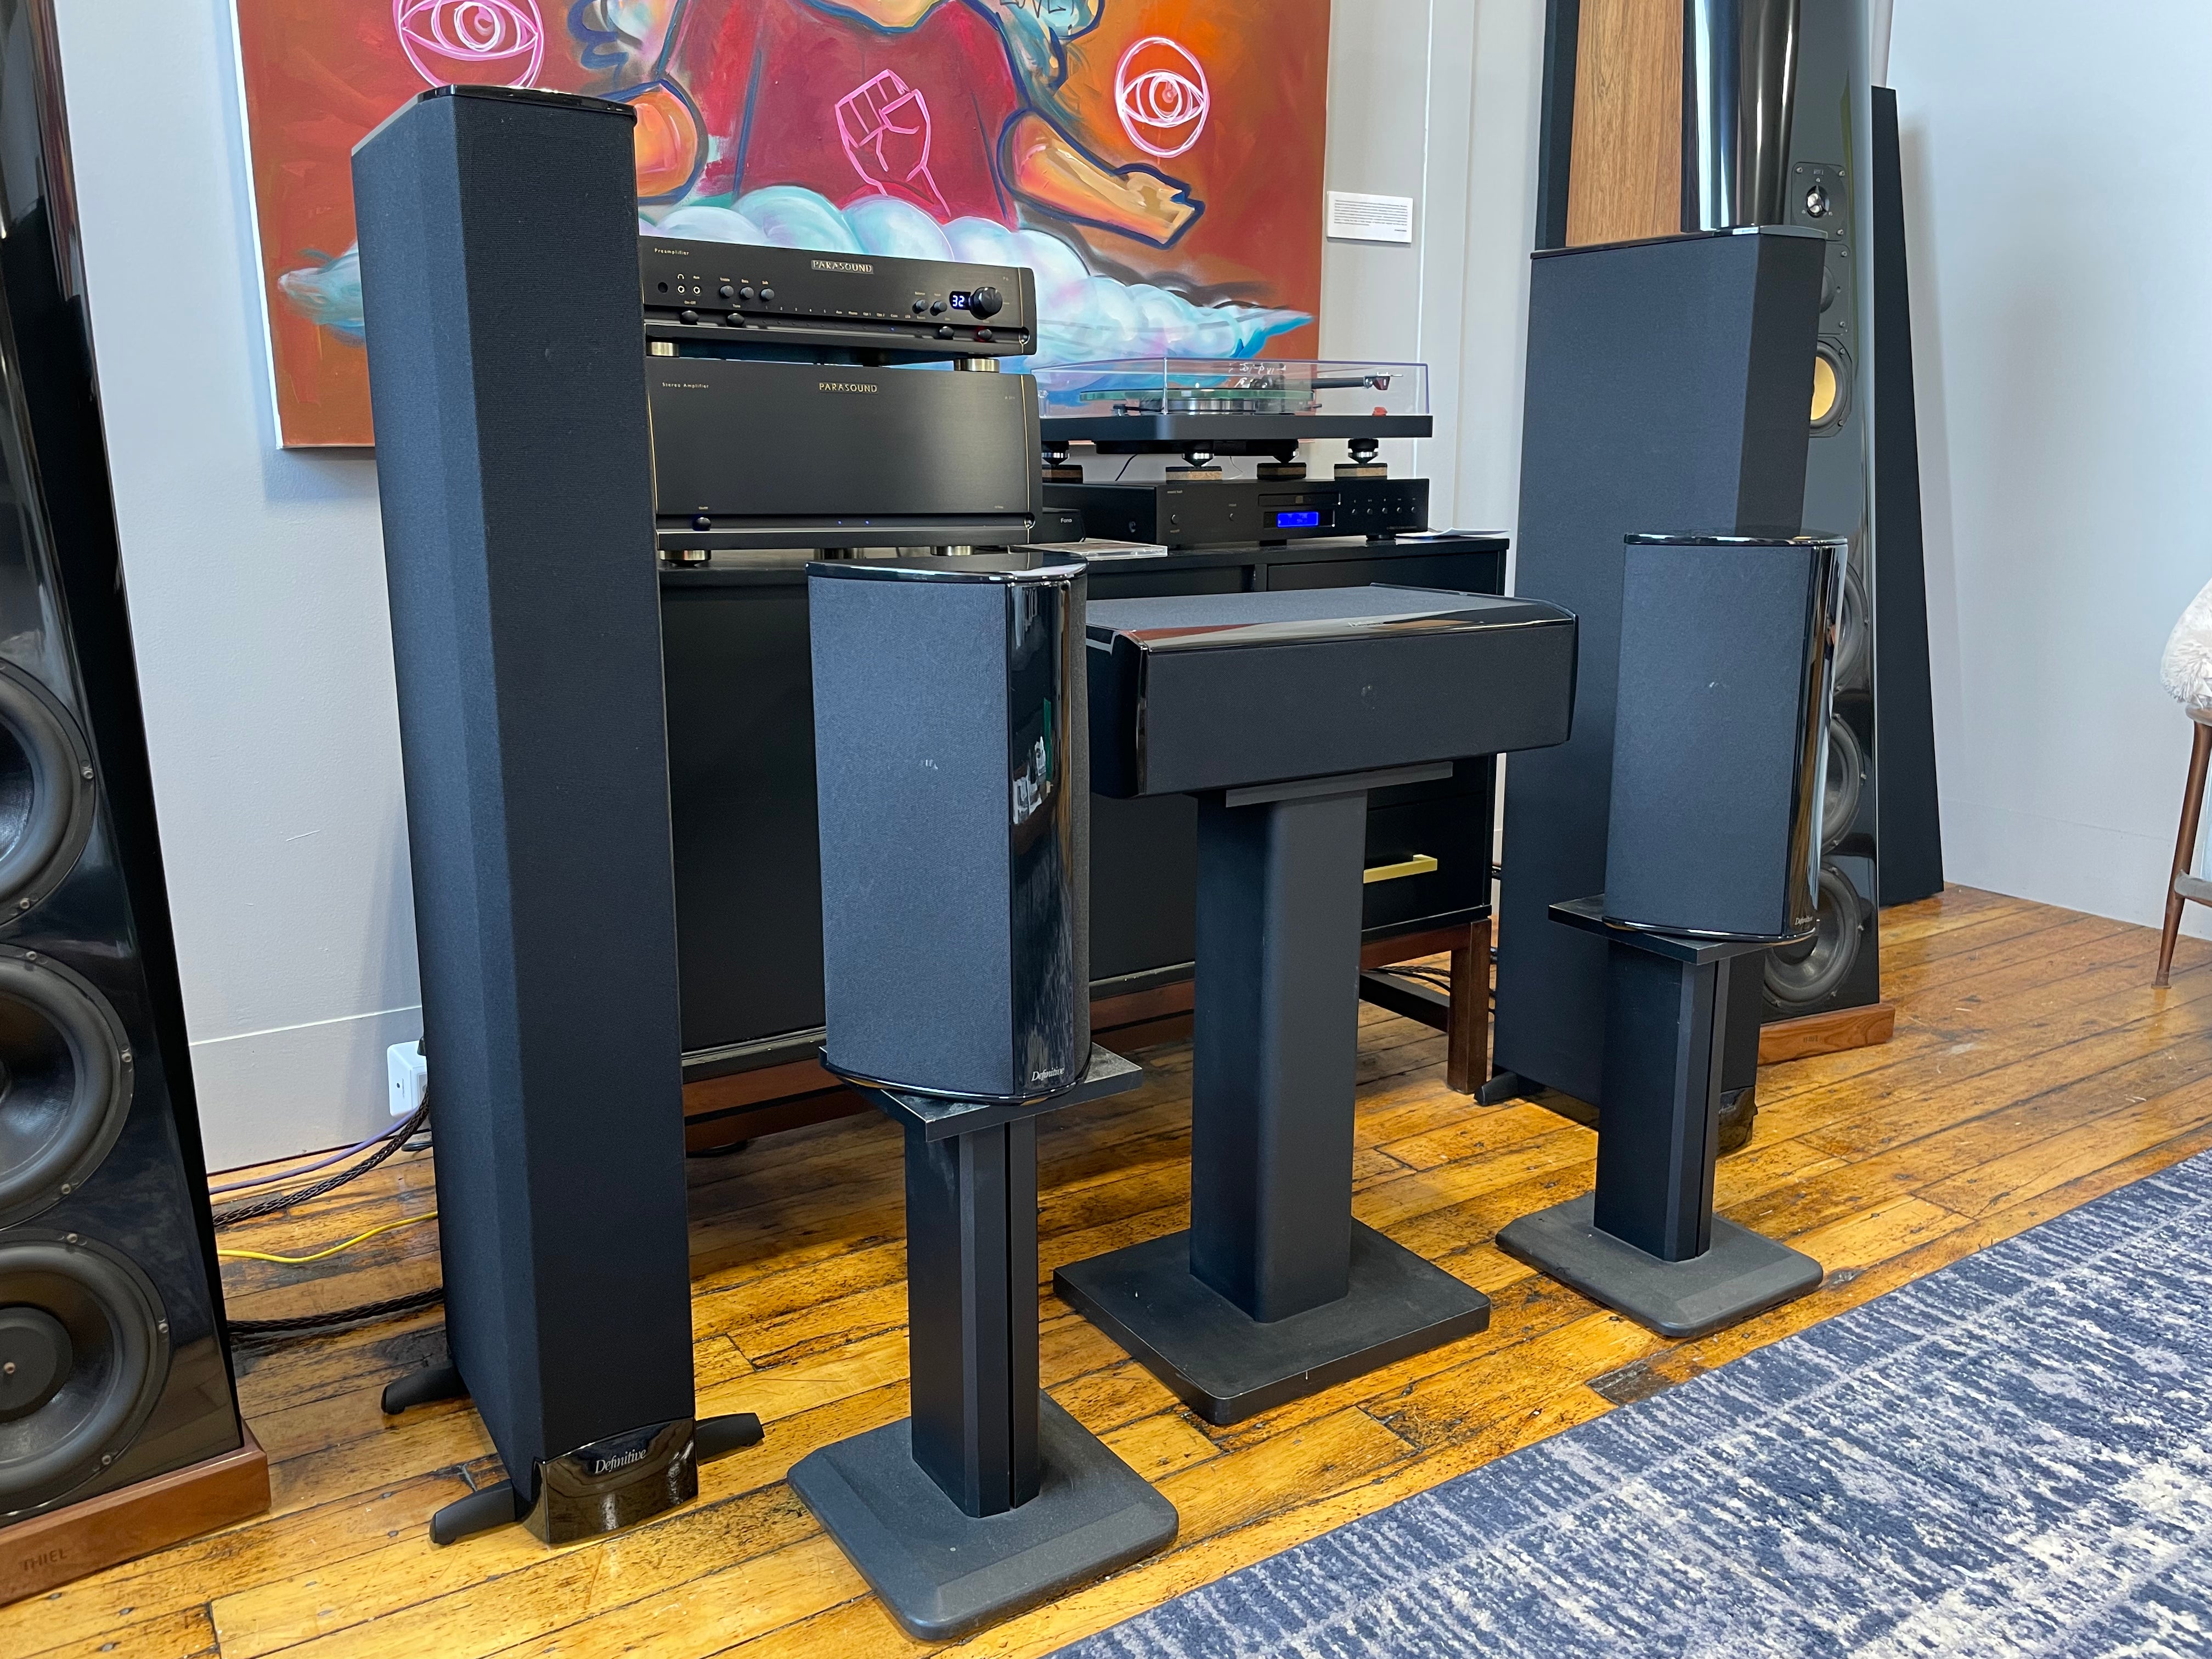 Definitive Techology, Full Home Theater Setup - Exceptional Value